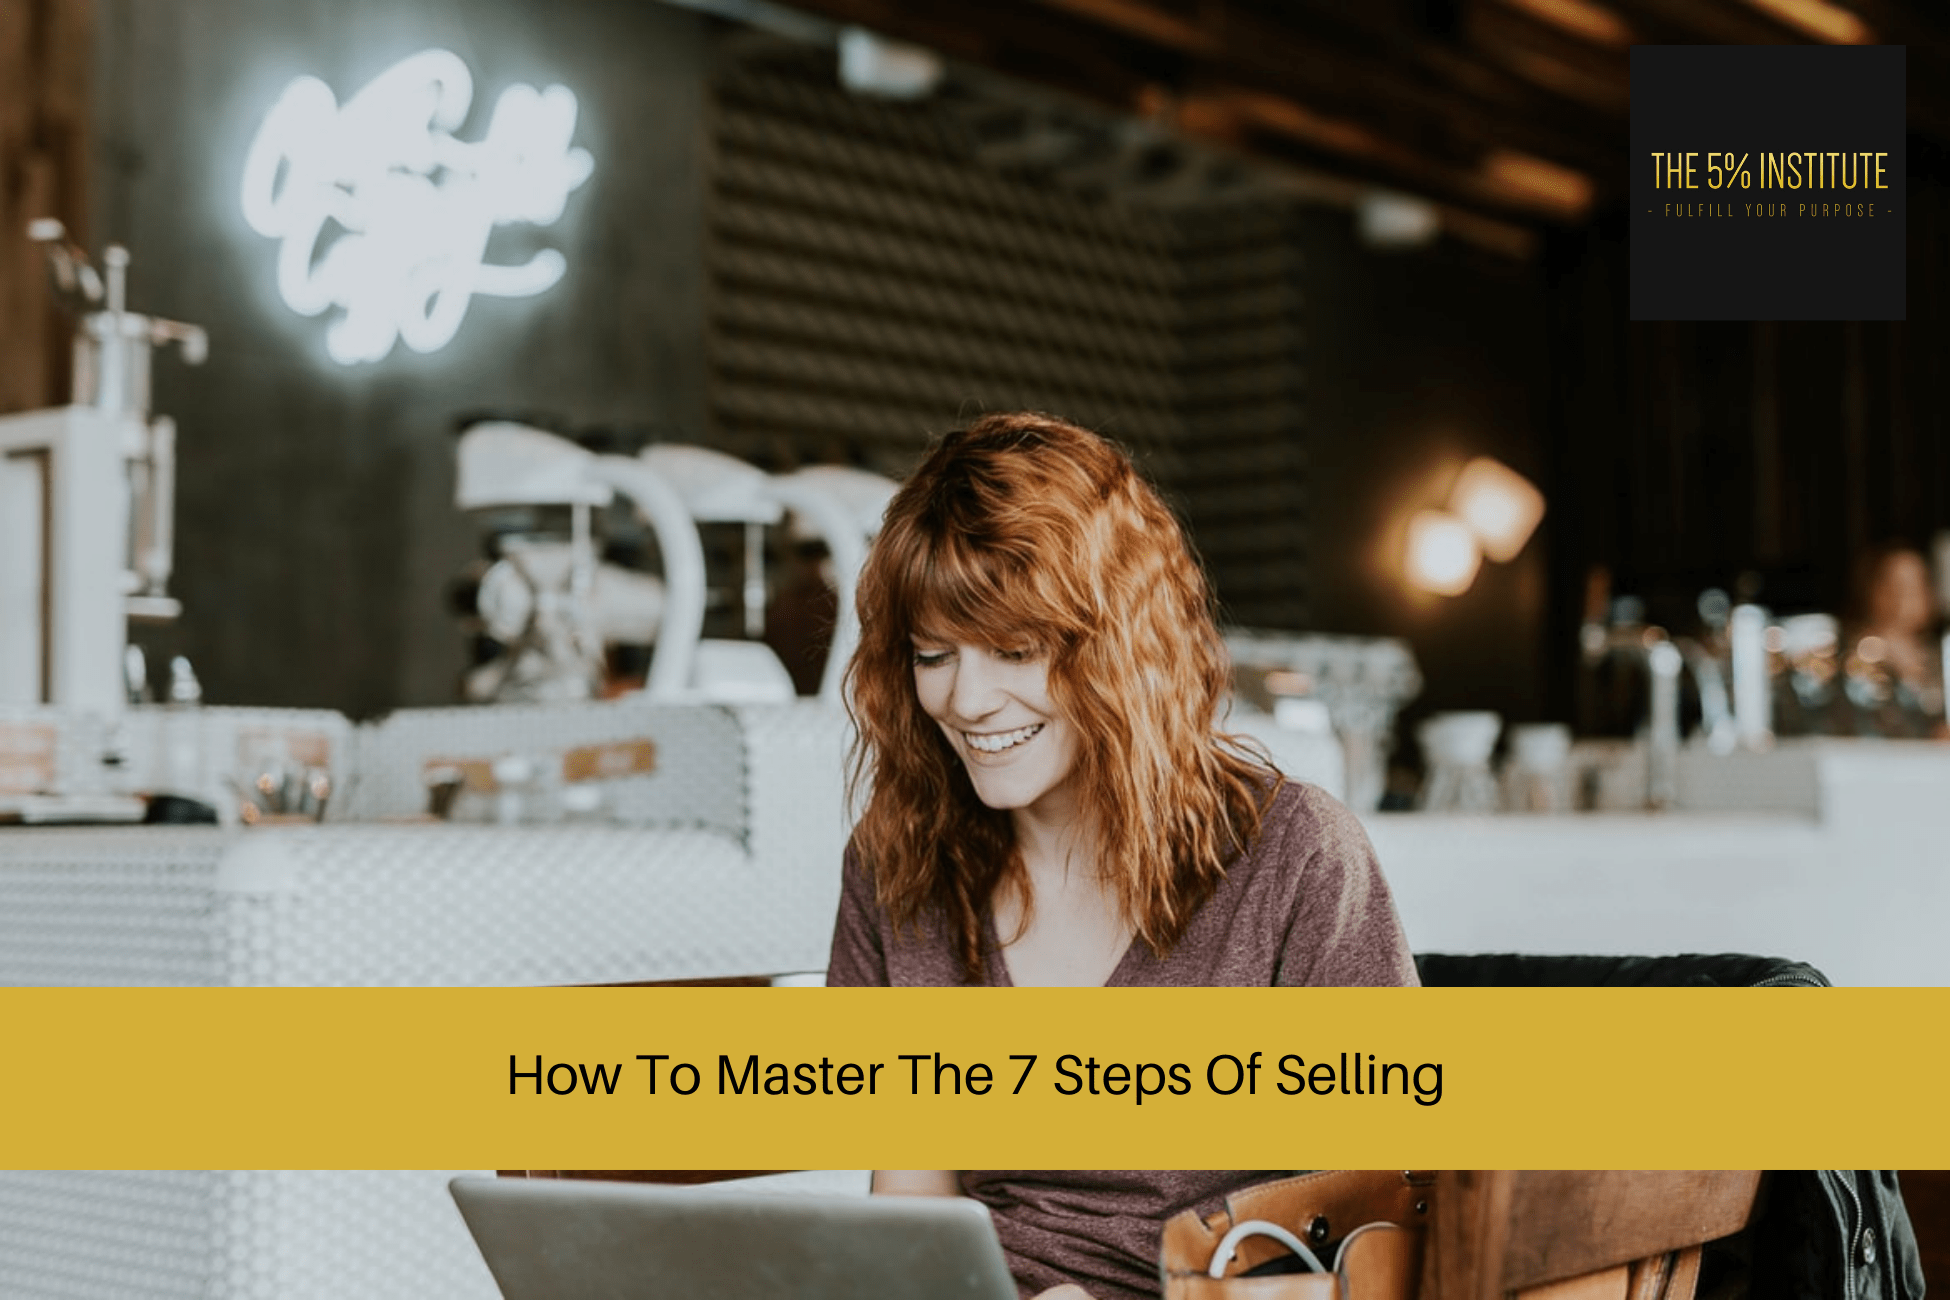 The 7 Steps Of Selling